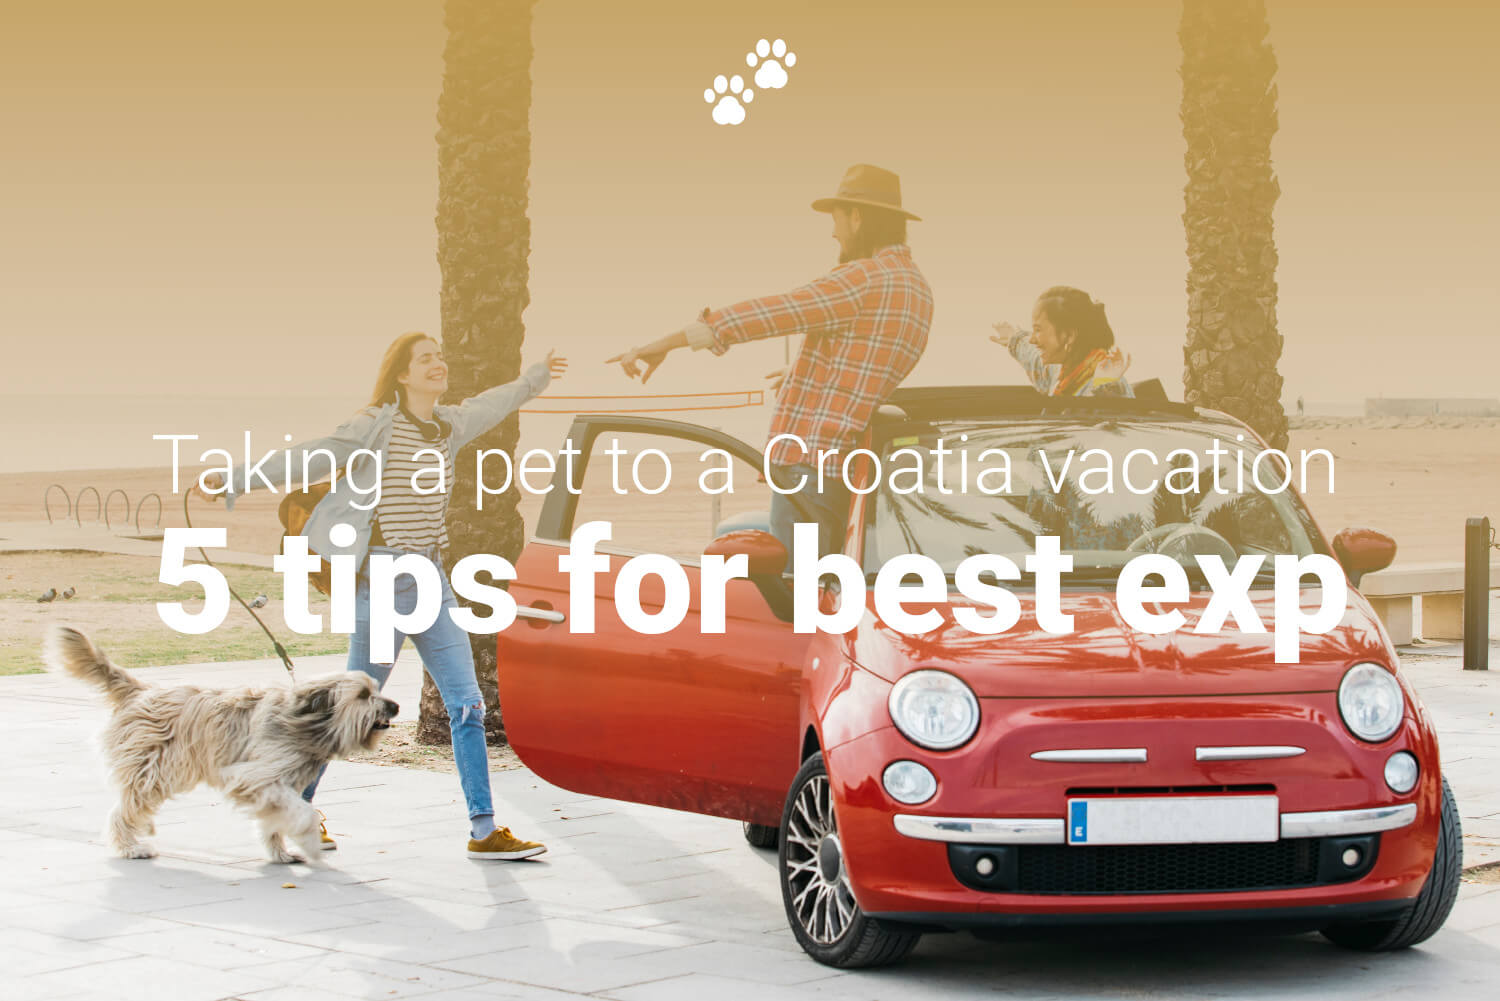 Do you want to bring your pet to Croatia?